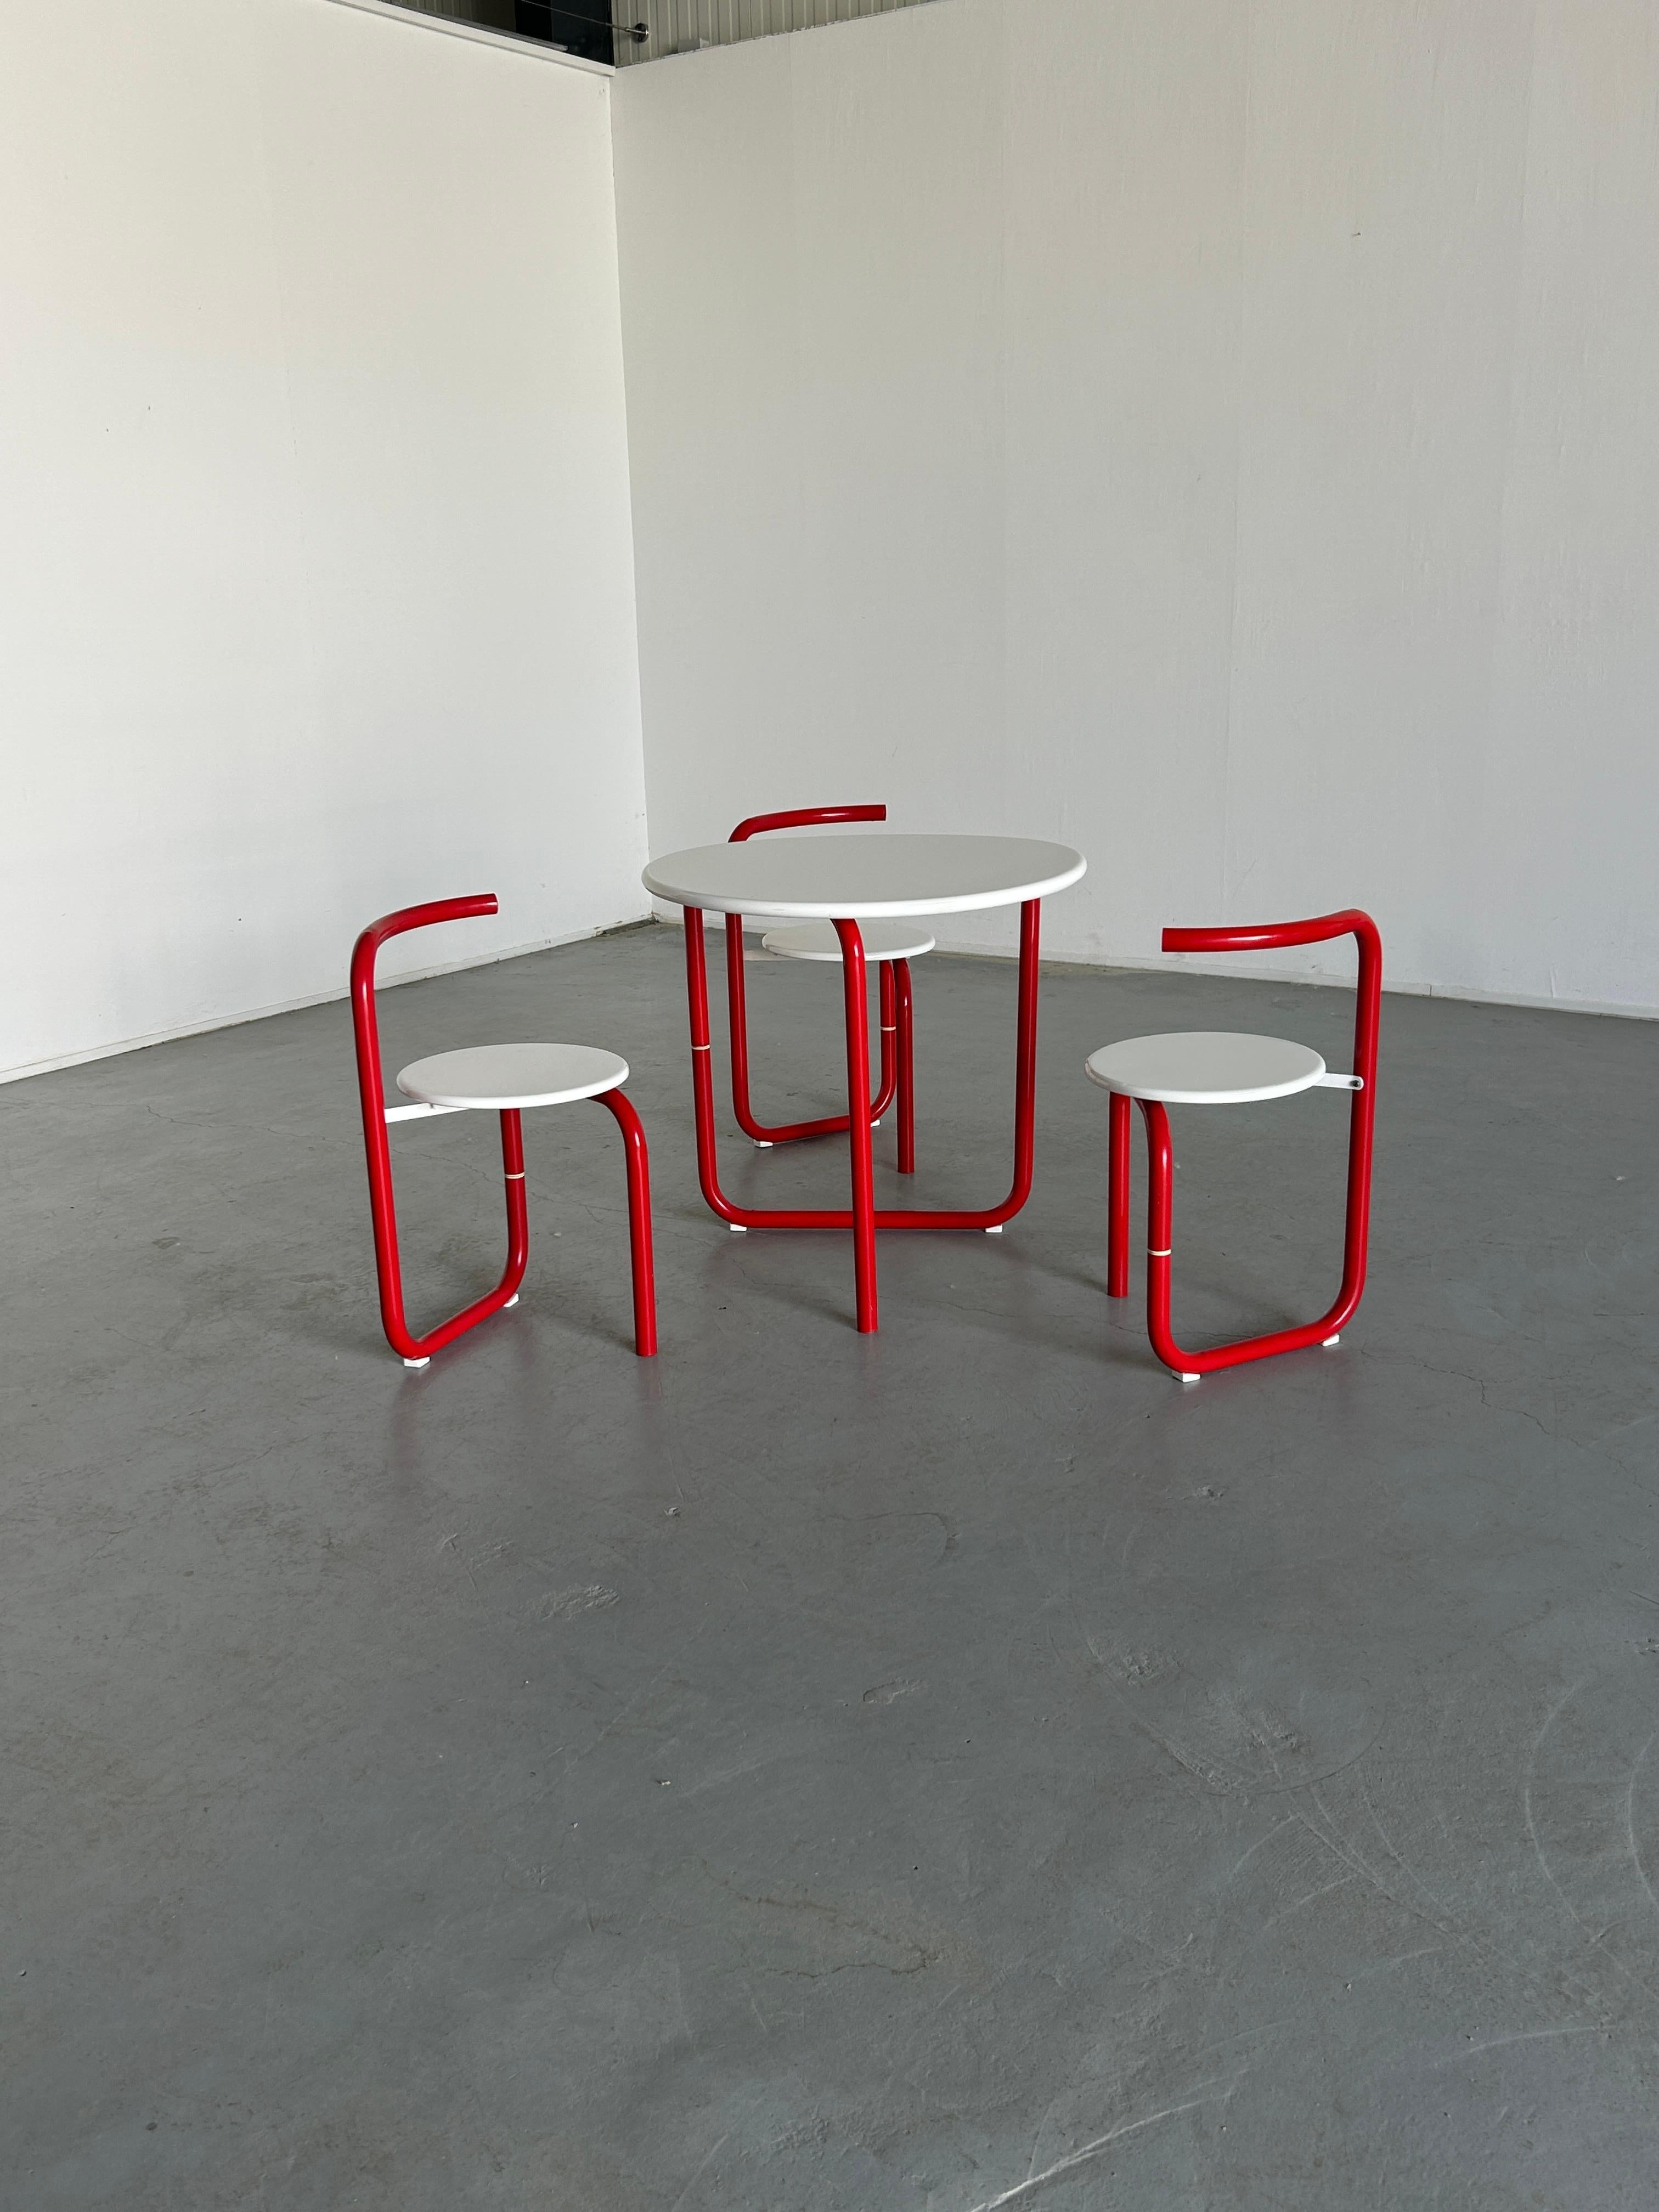 Set of three minimalist pop-art garden chairs with a matching garden table.
Unique design, 1970s Yugoslavian production.
Foldable.

Overall in very good vintage condition with smaller signs expected signs of age.
Condition is well depicted in the